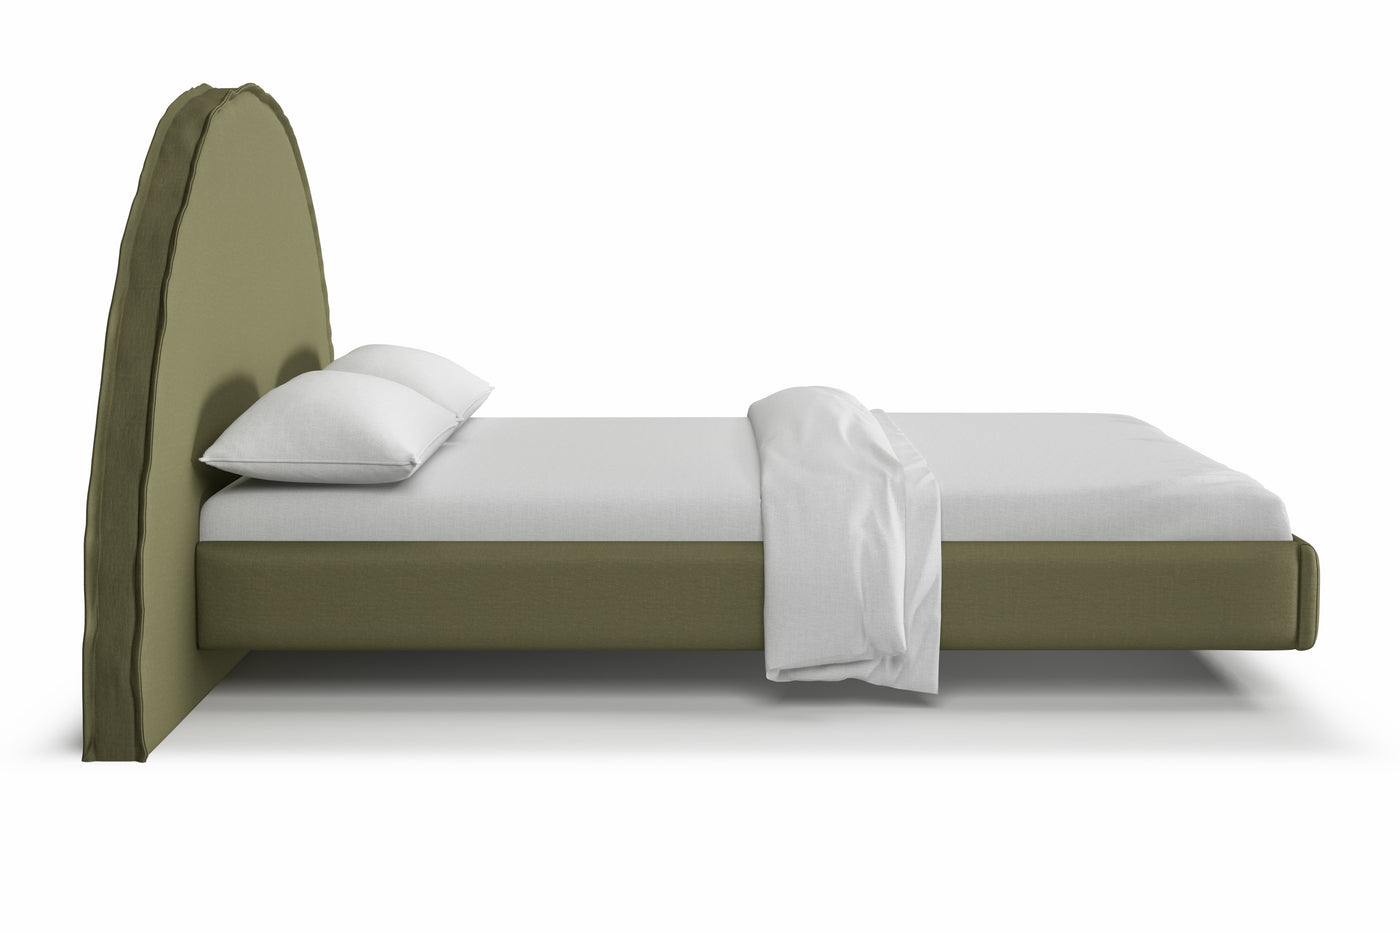 Floating Bed Frame featuring Half Moon round bed head and floating bed base. Upholstered in linen by Create Estate